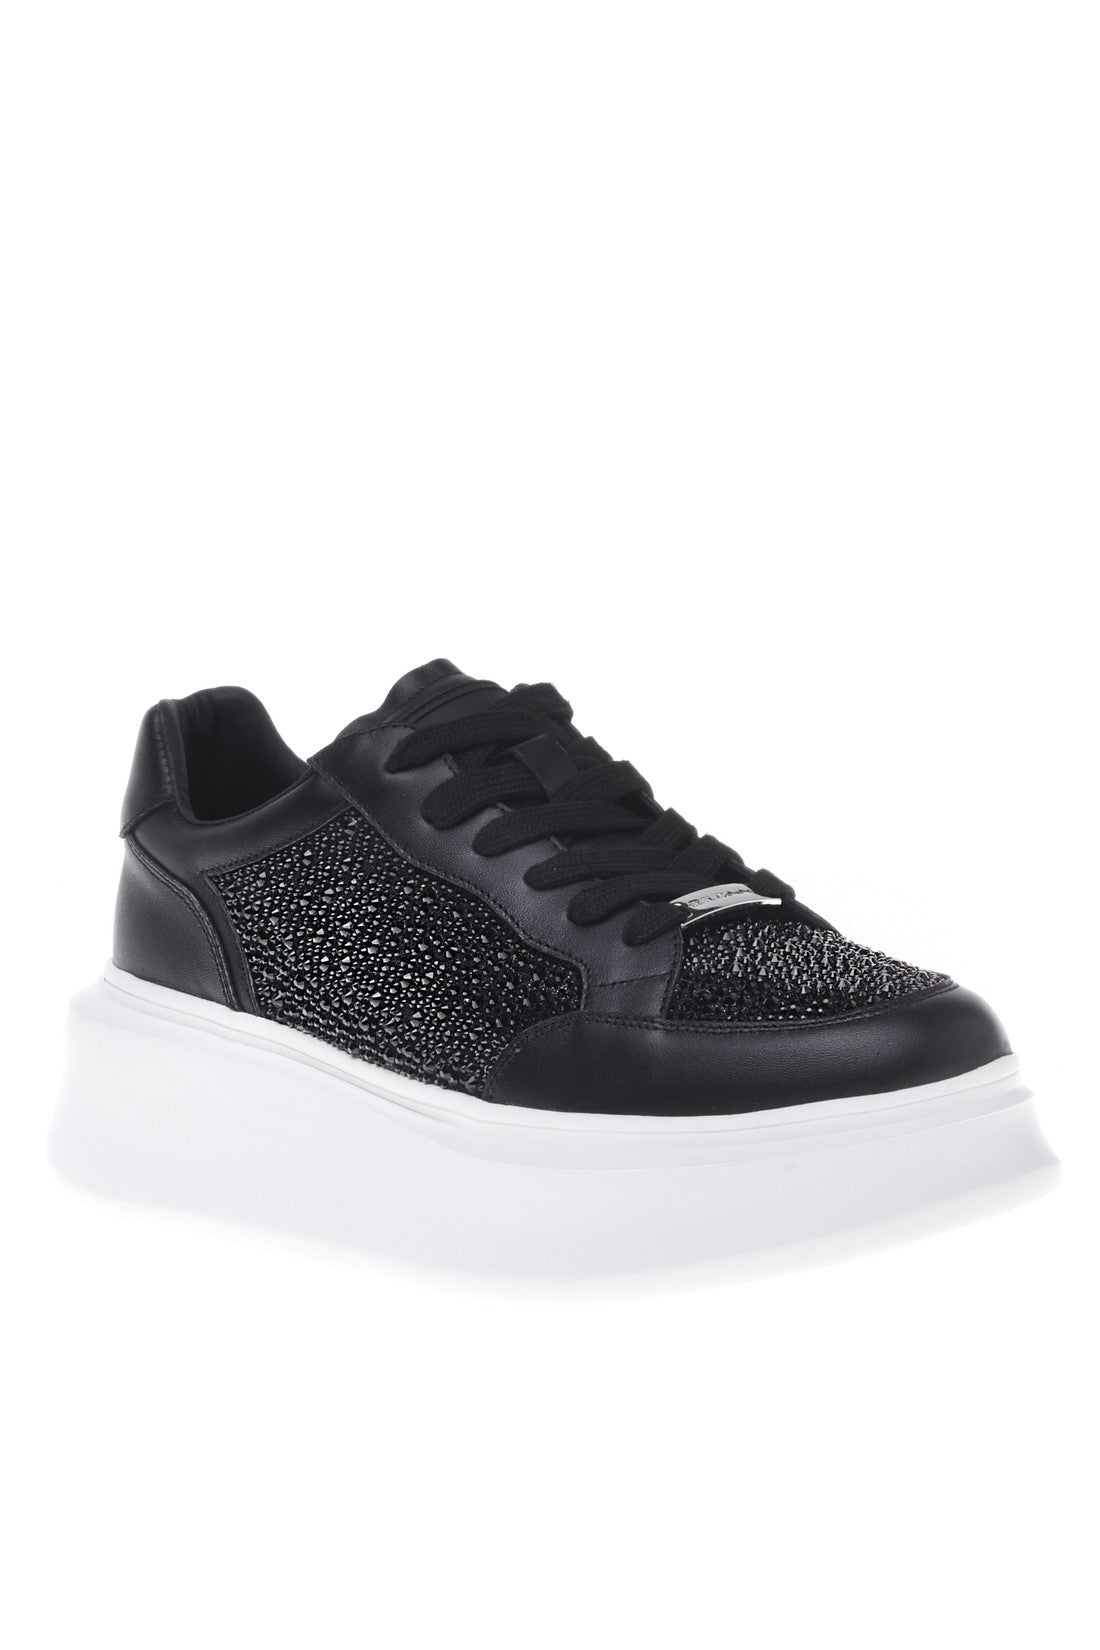 BALDININI-OUTLET-SALE-Sneaker-in-black-calfskin-with-rhinestones-Sneaker-35-ARCHIVE-COLLECTION.jpg